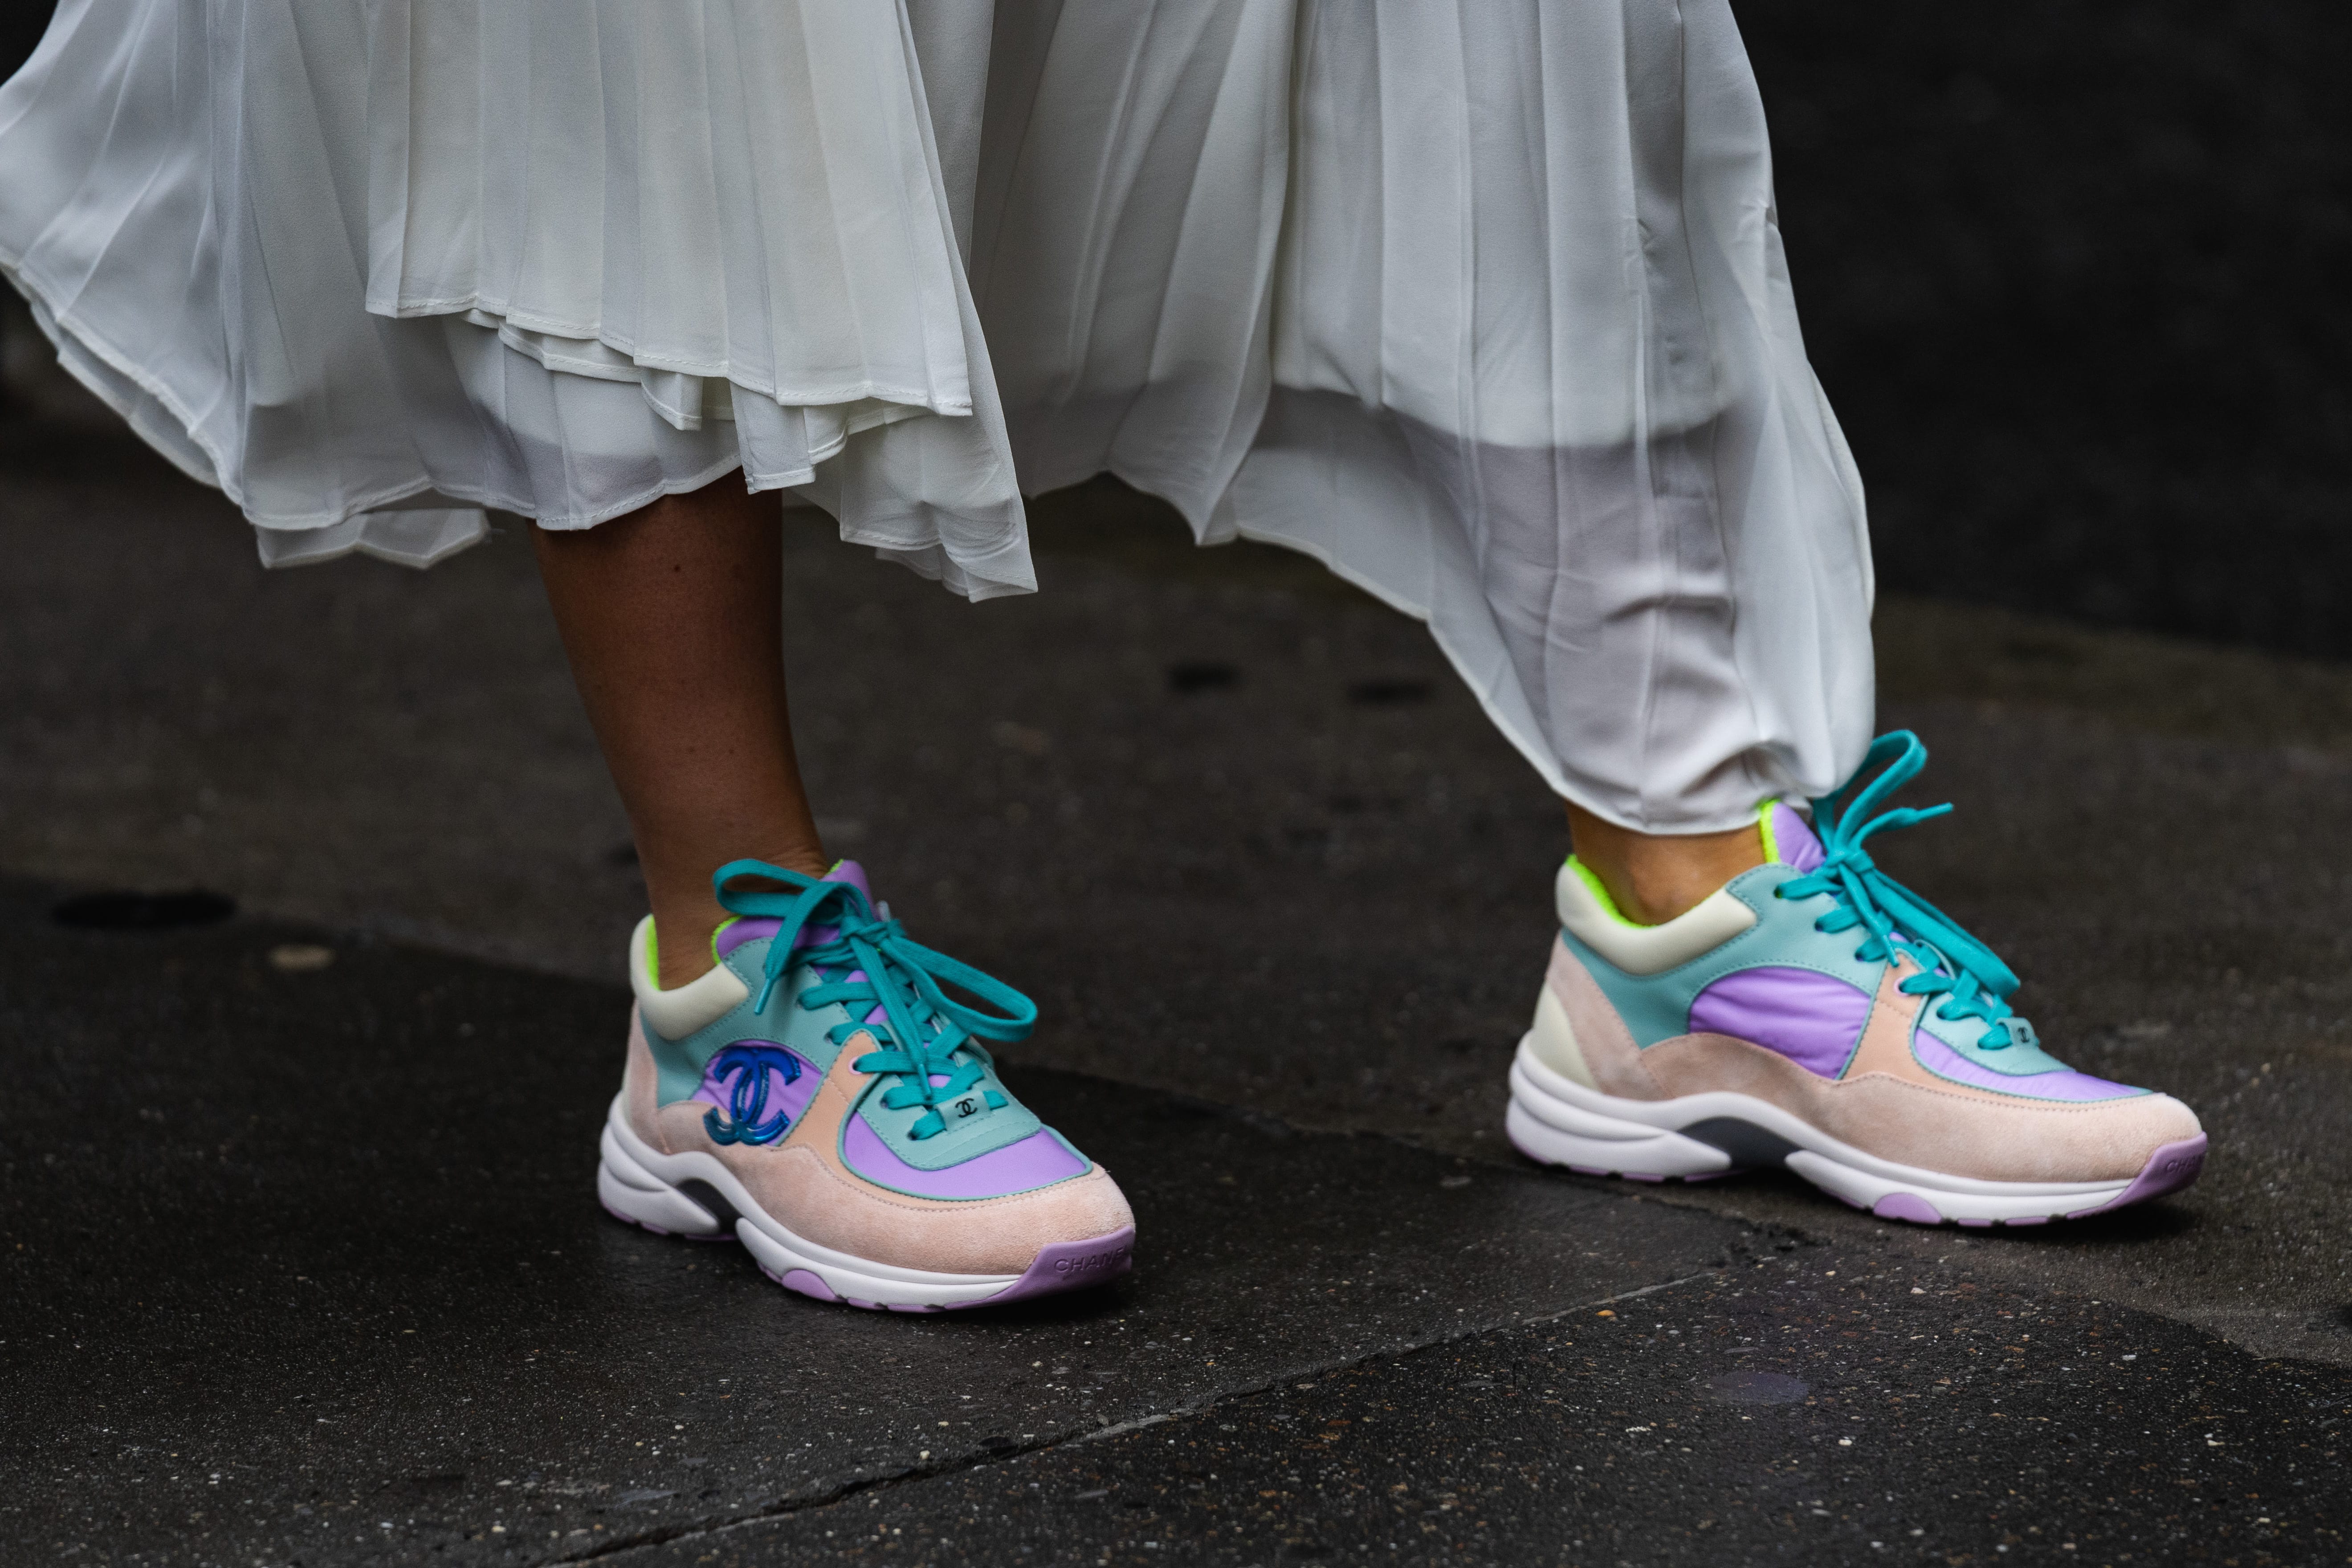 Street Style Sneakers at Fashion Week 